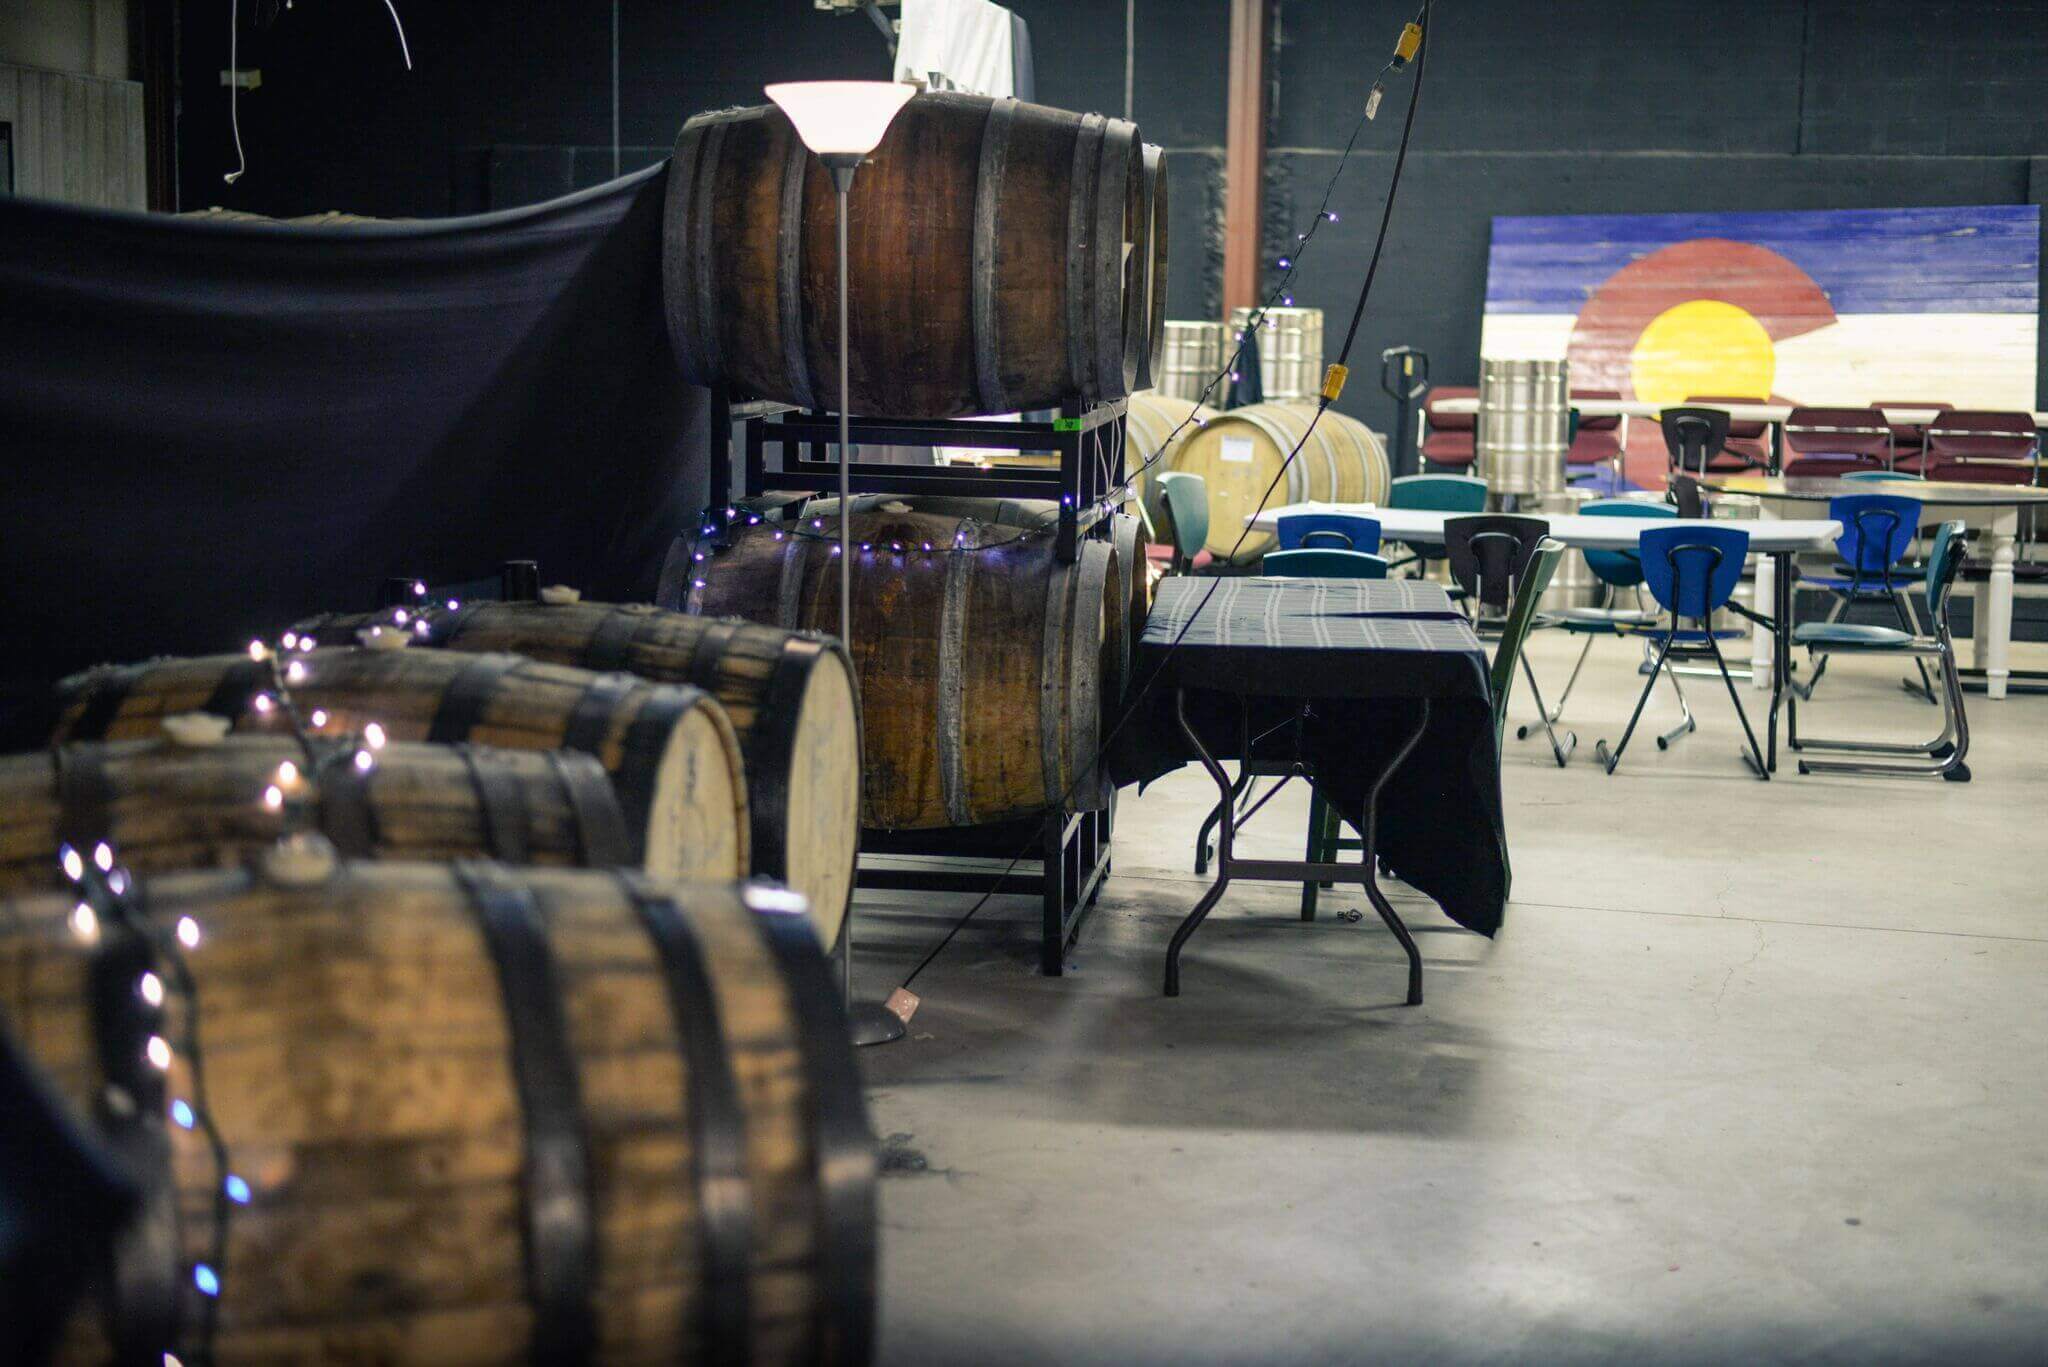 Brewery Event Space